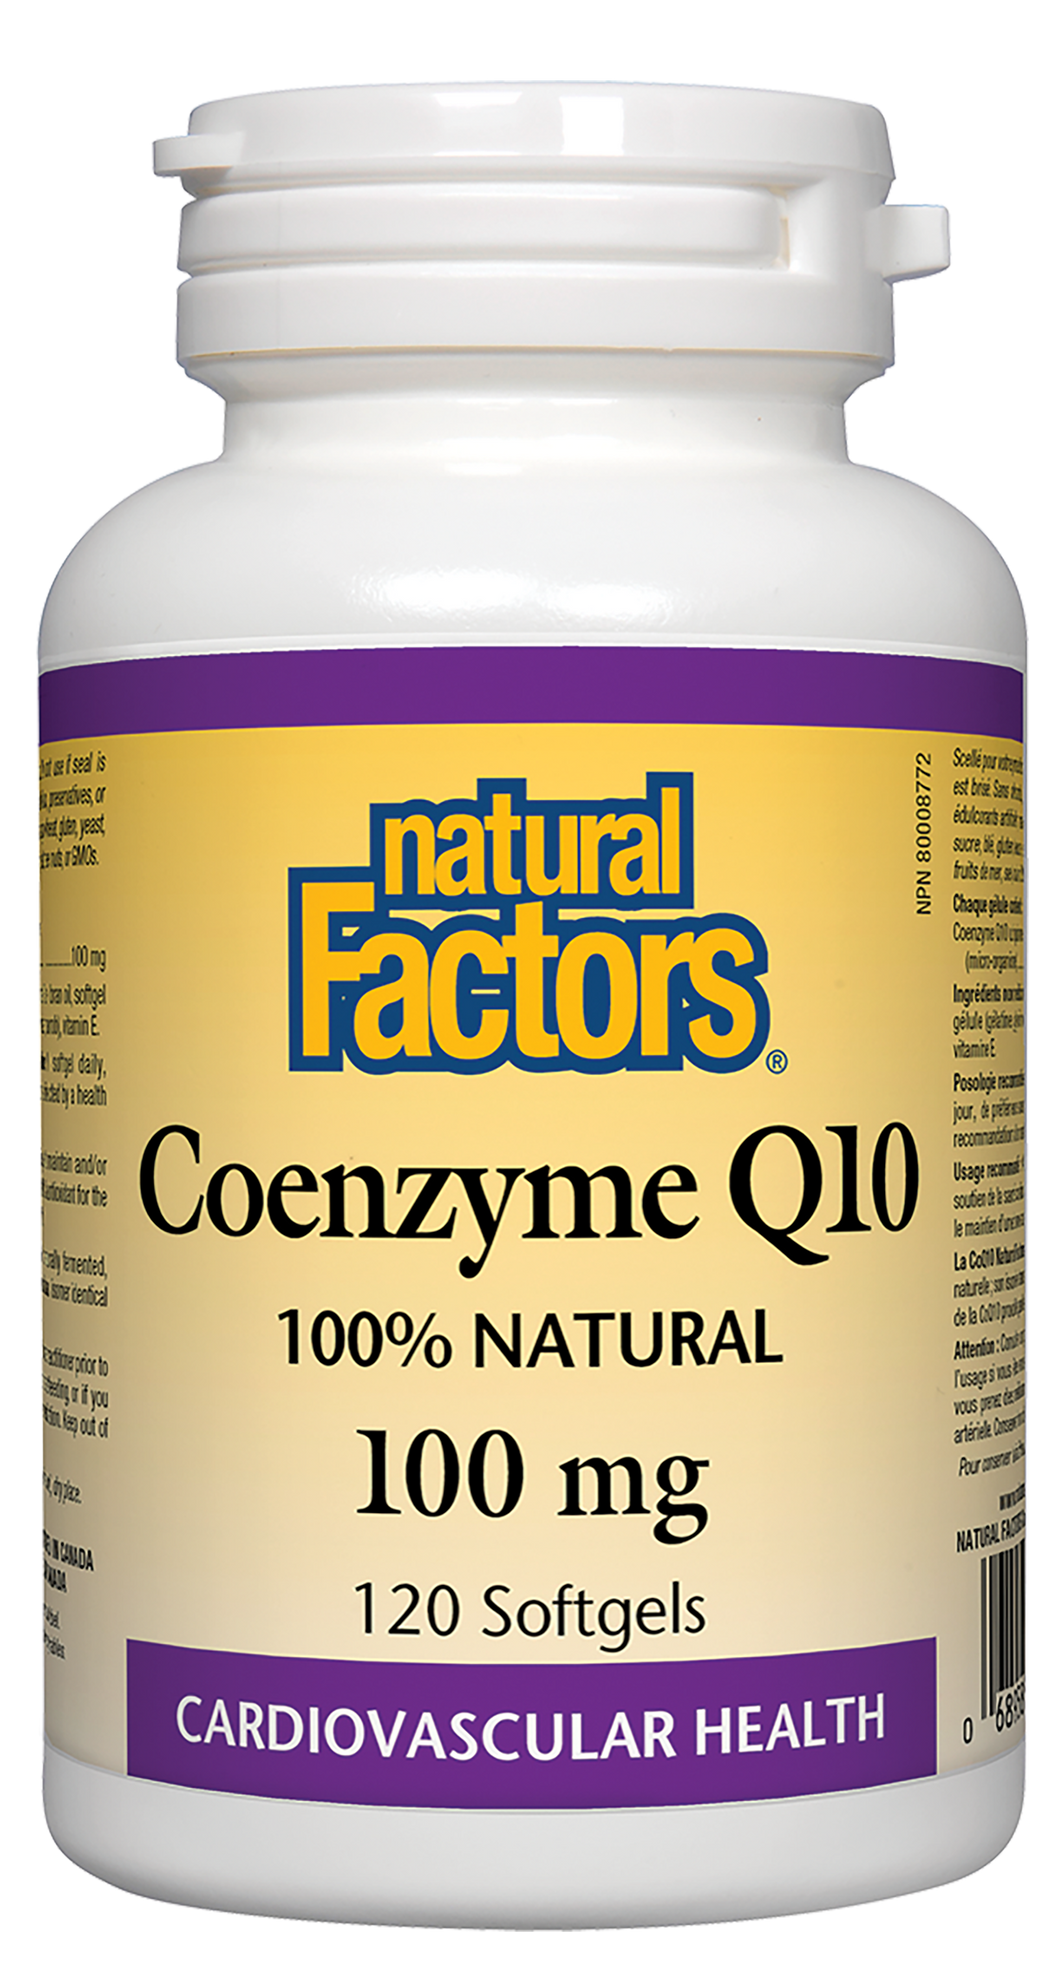 Coenzyme Q10 is a vitamin-like essential nutrient that helps increase levels of cellular energy production and is required by every cell in our body. Known to support cardiovascular health and cellular vigour. Natural Factors Coenzyme Q10 100 mg is 100% natural.